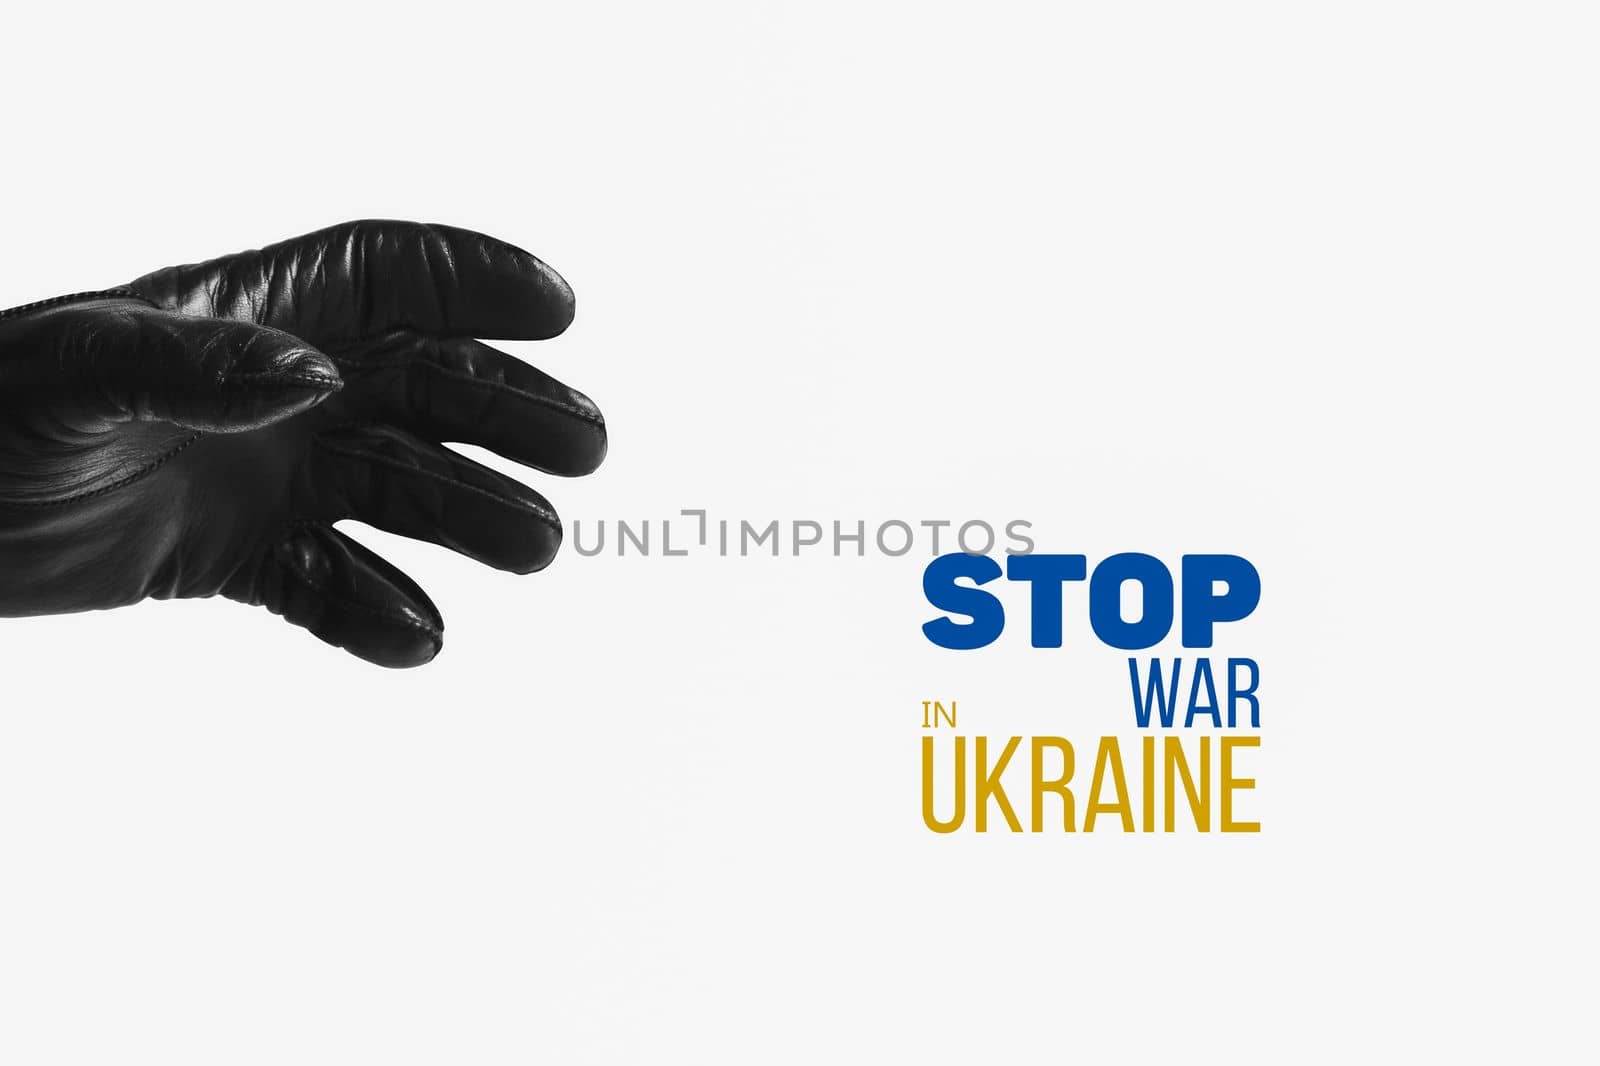 hand of terror in black leather glove reaches out to seize the symbol of freedom of ukraine with words stop war in ukraine. concept needs help and support, truth will win